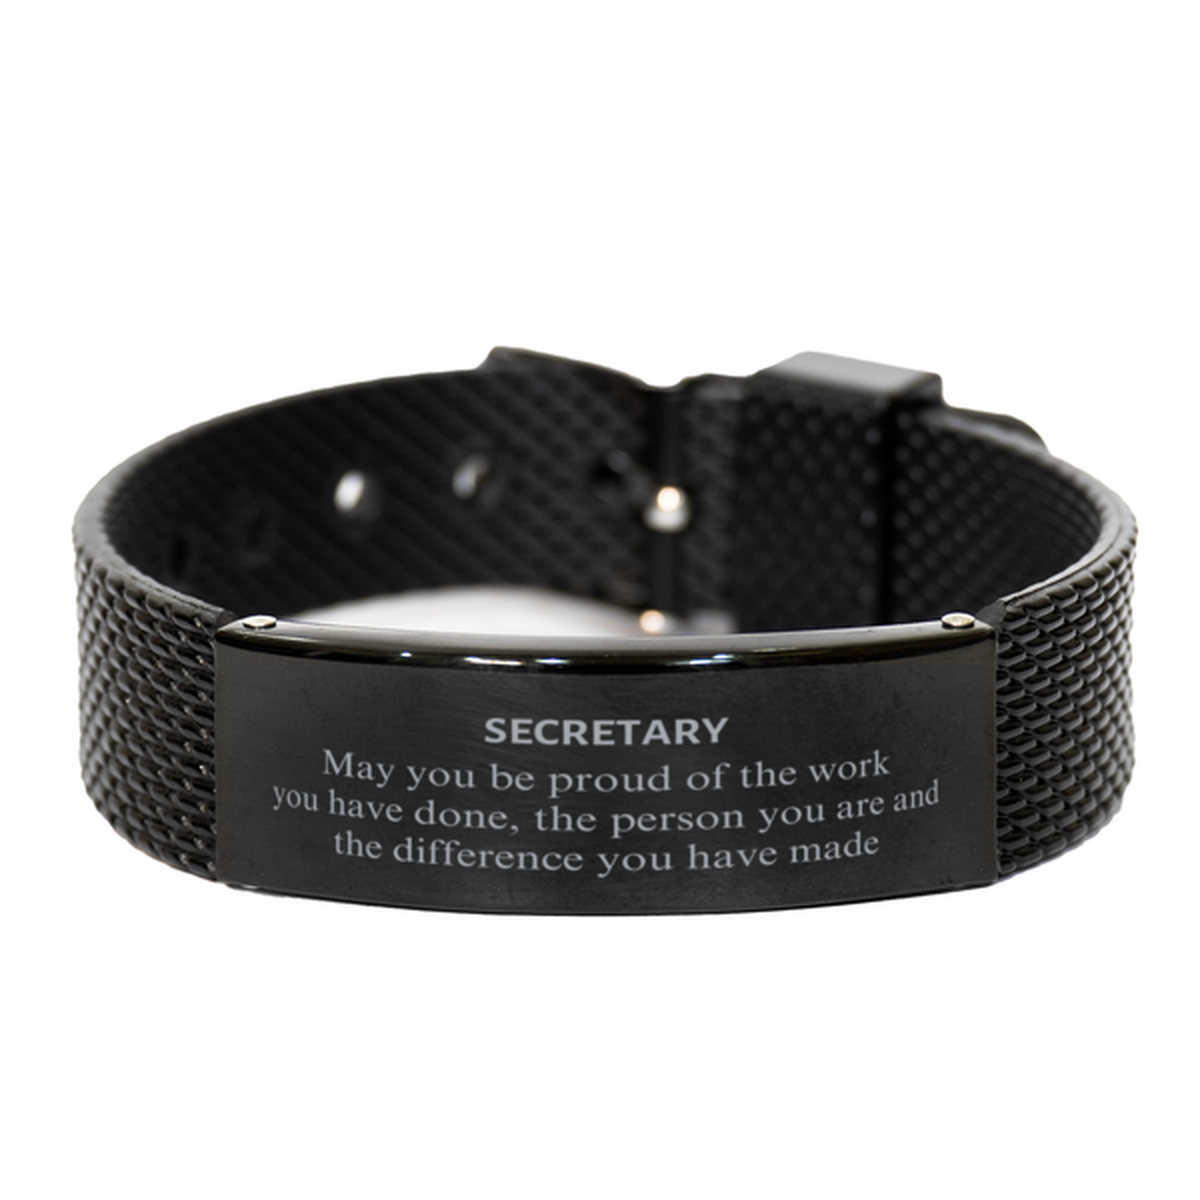 Secretary May you be proud of the work you have done, Retirement Secretary Black Shark Mesh Bracelet for Colleague Appreciation Gifts Amazing for Secretary